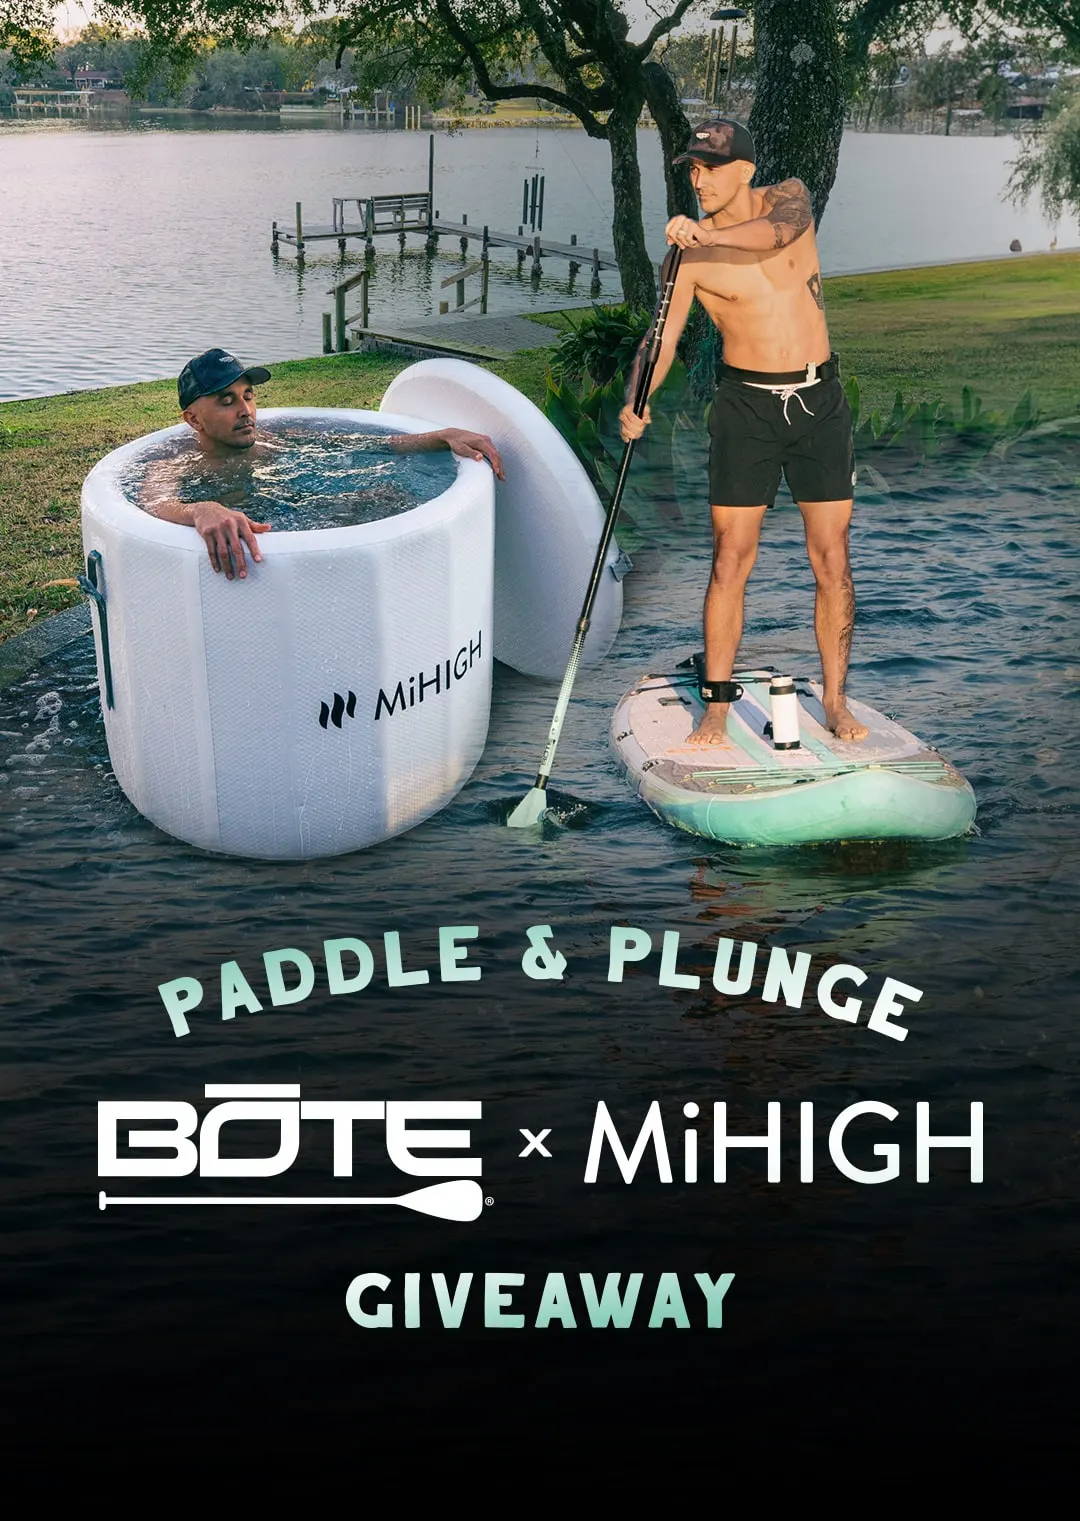 BOTE x MiHIGH Paddle & Plunge Giveaway